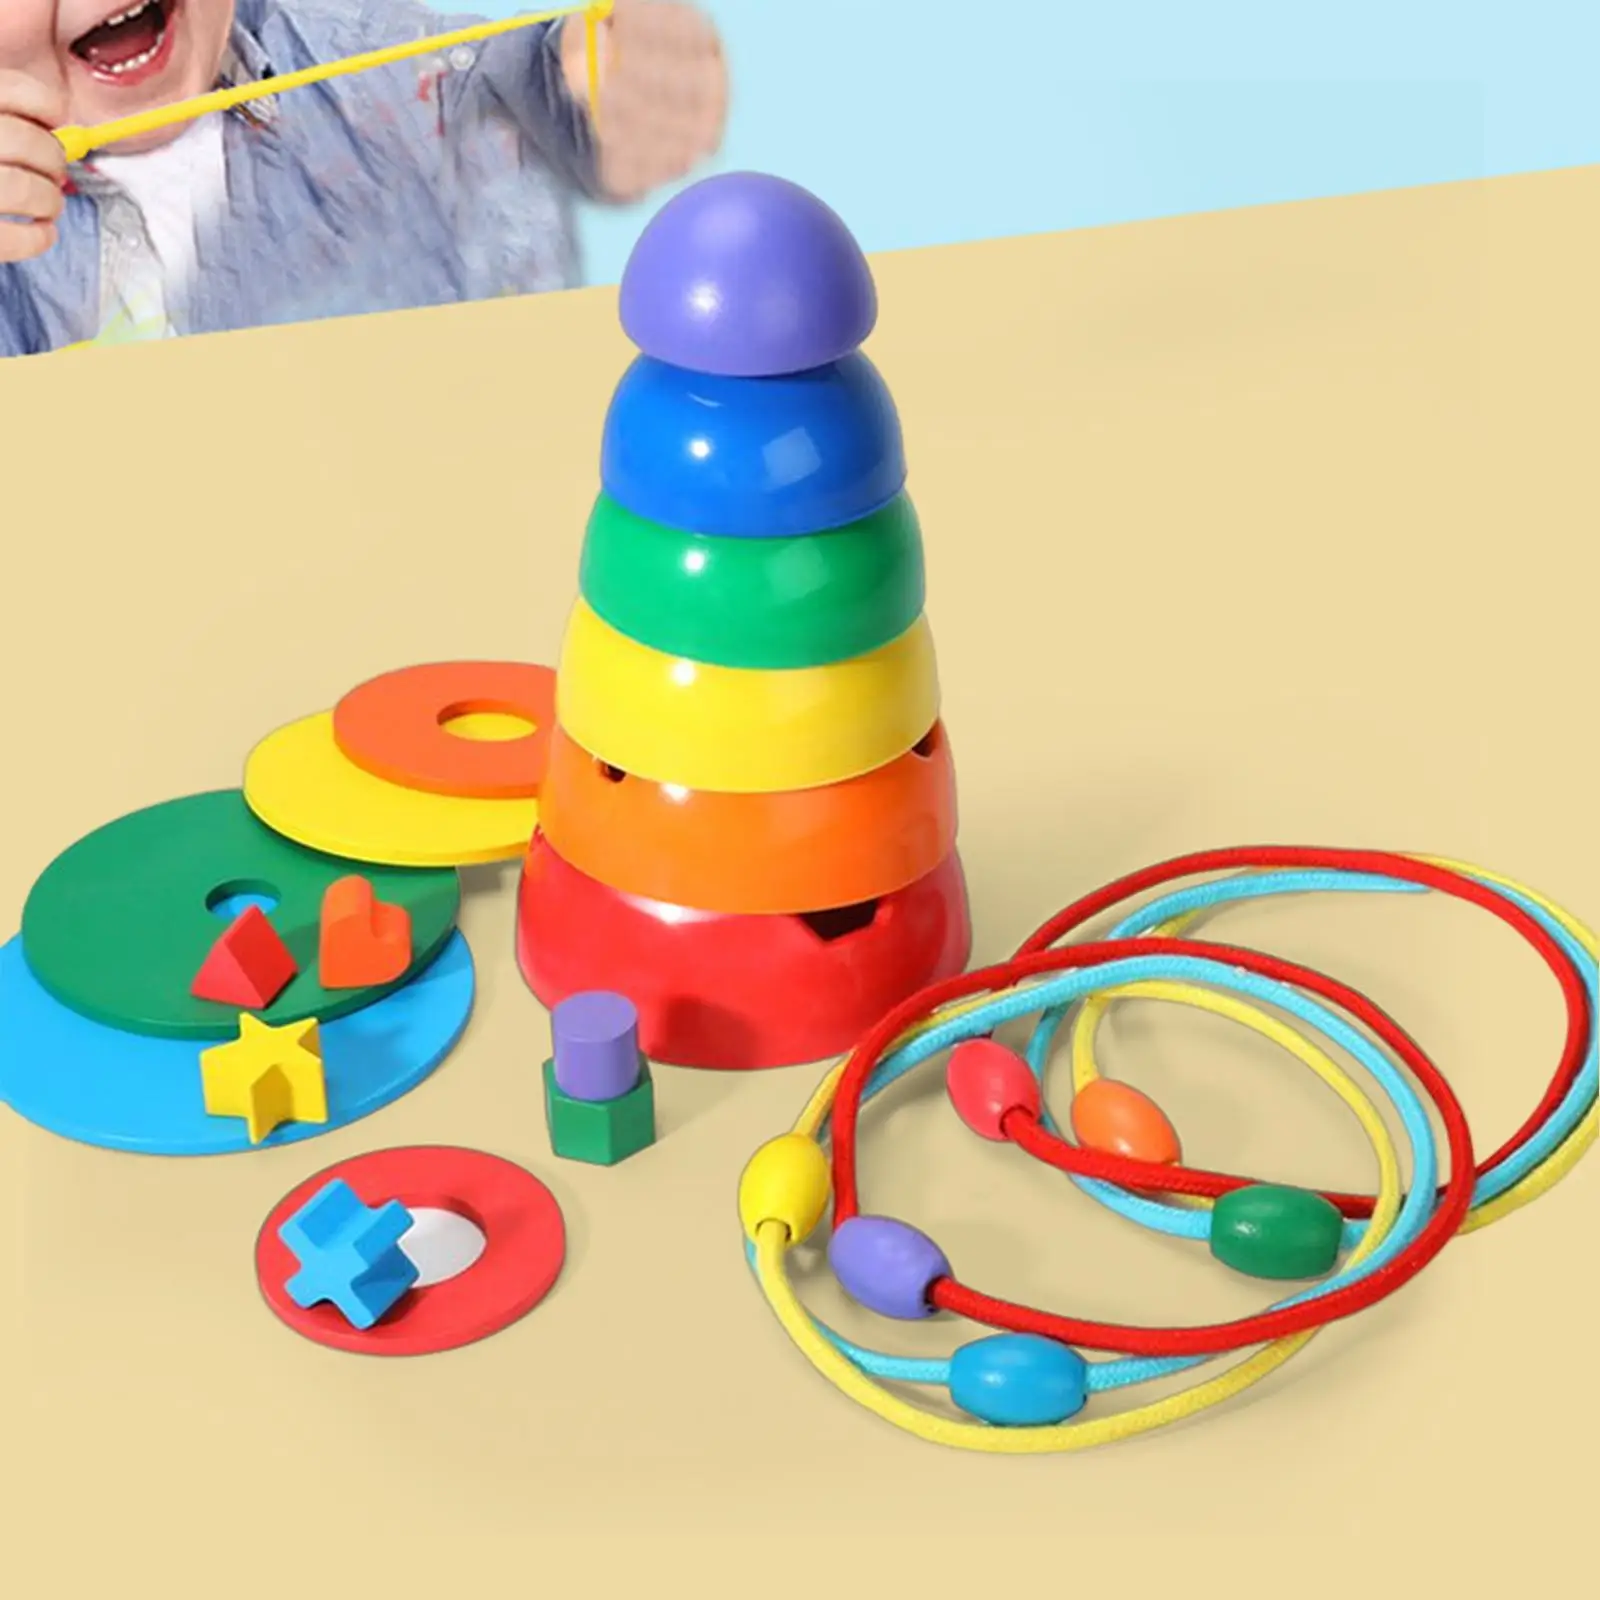 Wooden Stacking Blocks Colorful Stacker Shape Matching for Birthday Gift